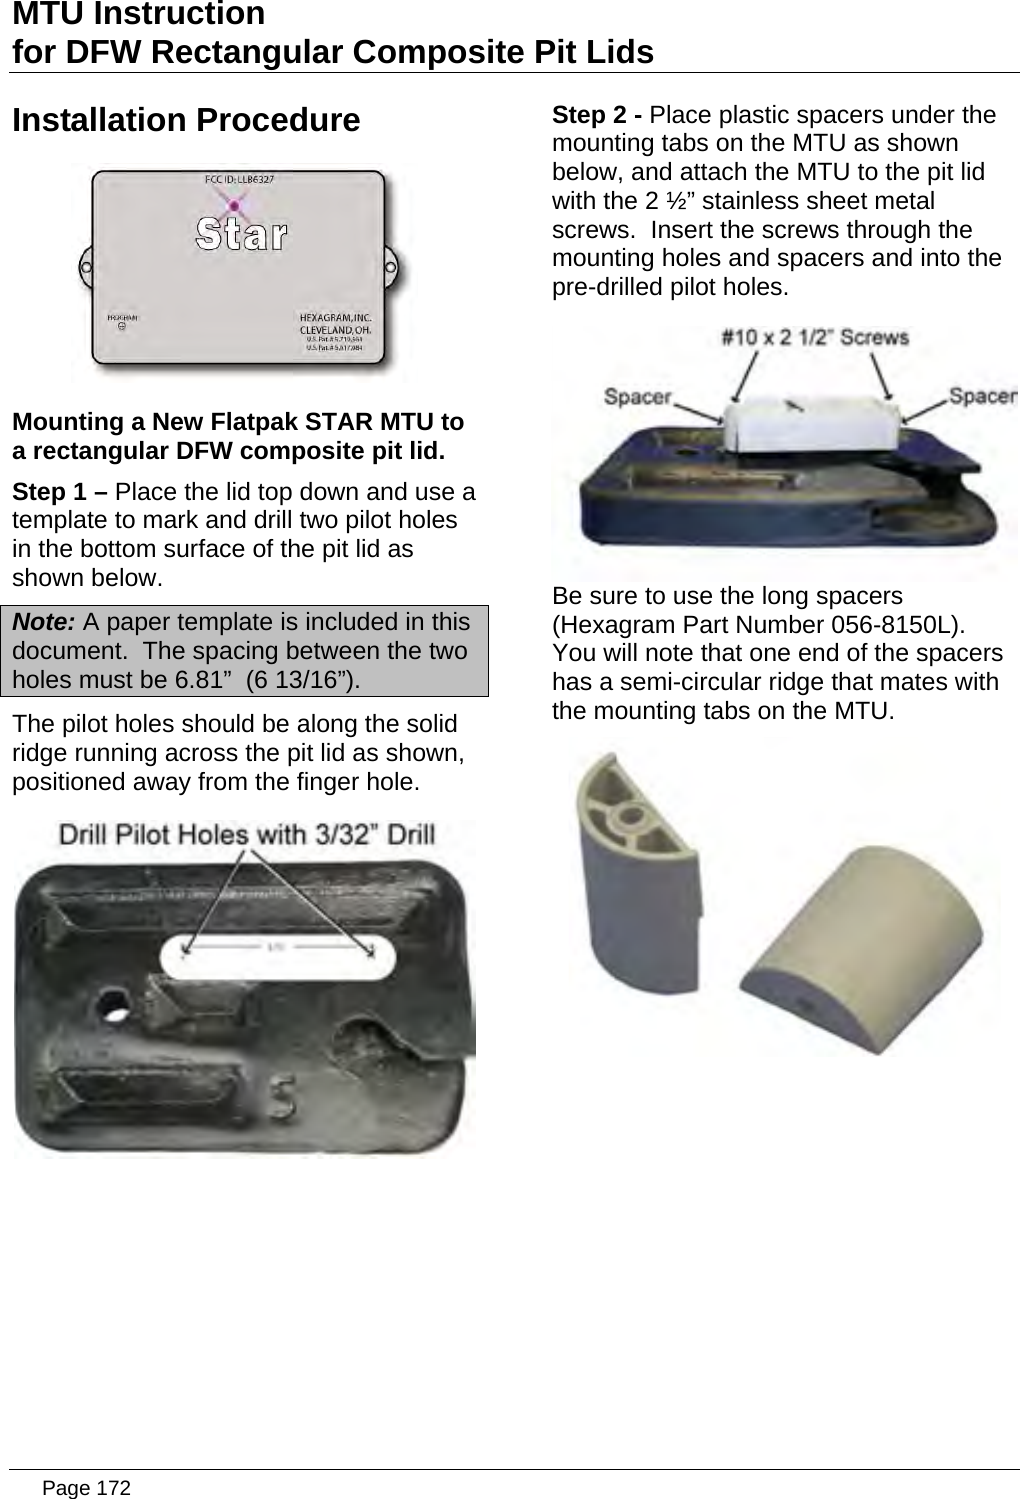 MTU Instruction for DFW Rectangular Composite Pit Lids Installation Procedure  Mounting a New Flatpak STAR MTU to a rectangular DFW composite pit lid. Step 1 – Place the lid top down and use a template to mark and drill two pilot holes in the bottom surface of the pit lid as shown below. Note: A paper template is included in this document.  The spacing between the two holes must be 6.81”  (6 13/16”). The pilot holes should be along the solid ridge running across the pit lid as shown, positioned away from the finger hole.  Step 2 - Place plastic spacers under the mounting tabs on the MTU as shown below, and attach the MTU to the pit lid with the 2 ½” stainless sheet metal screws.  Insert the screws through the mounting holes and spacers and into the pre-drilled pilot holes.  Be sure to use the long spacers (Hexagram Part Number 056-8150L).  You will note that one end of the spacers has a semi-circular ridge that mates with the mounting tabs on the MTU.    Page 172